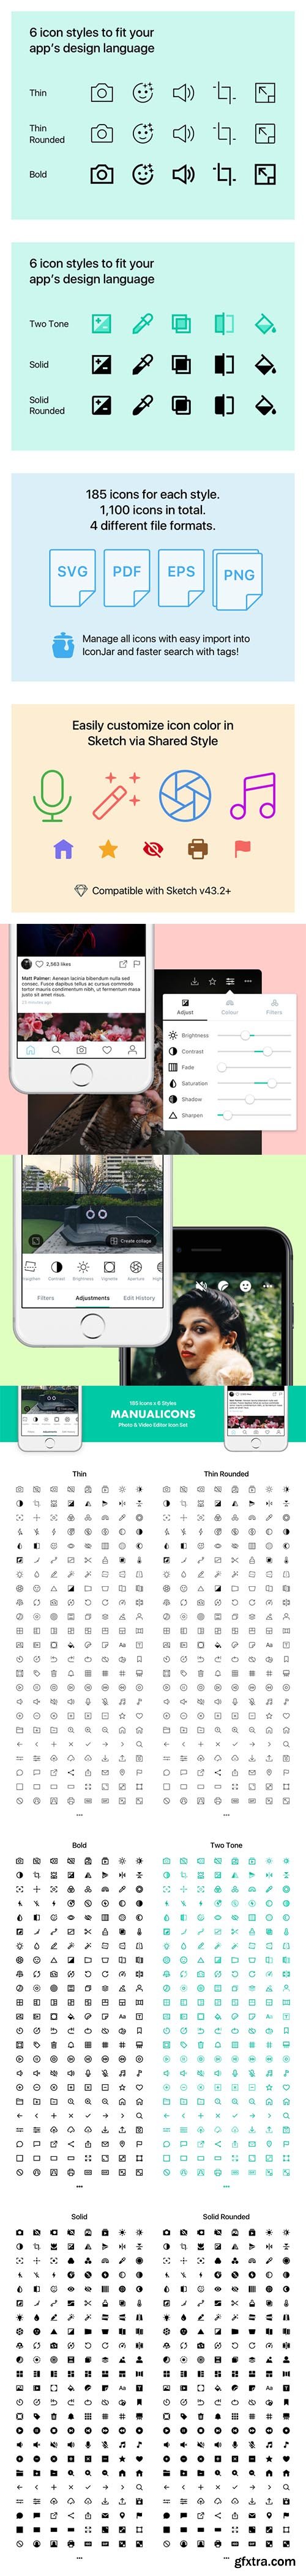 Manualicons - 185 Clean icons in 6 styles for your photo & video editor UI & more